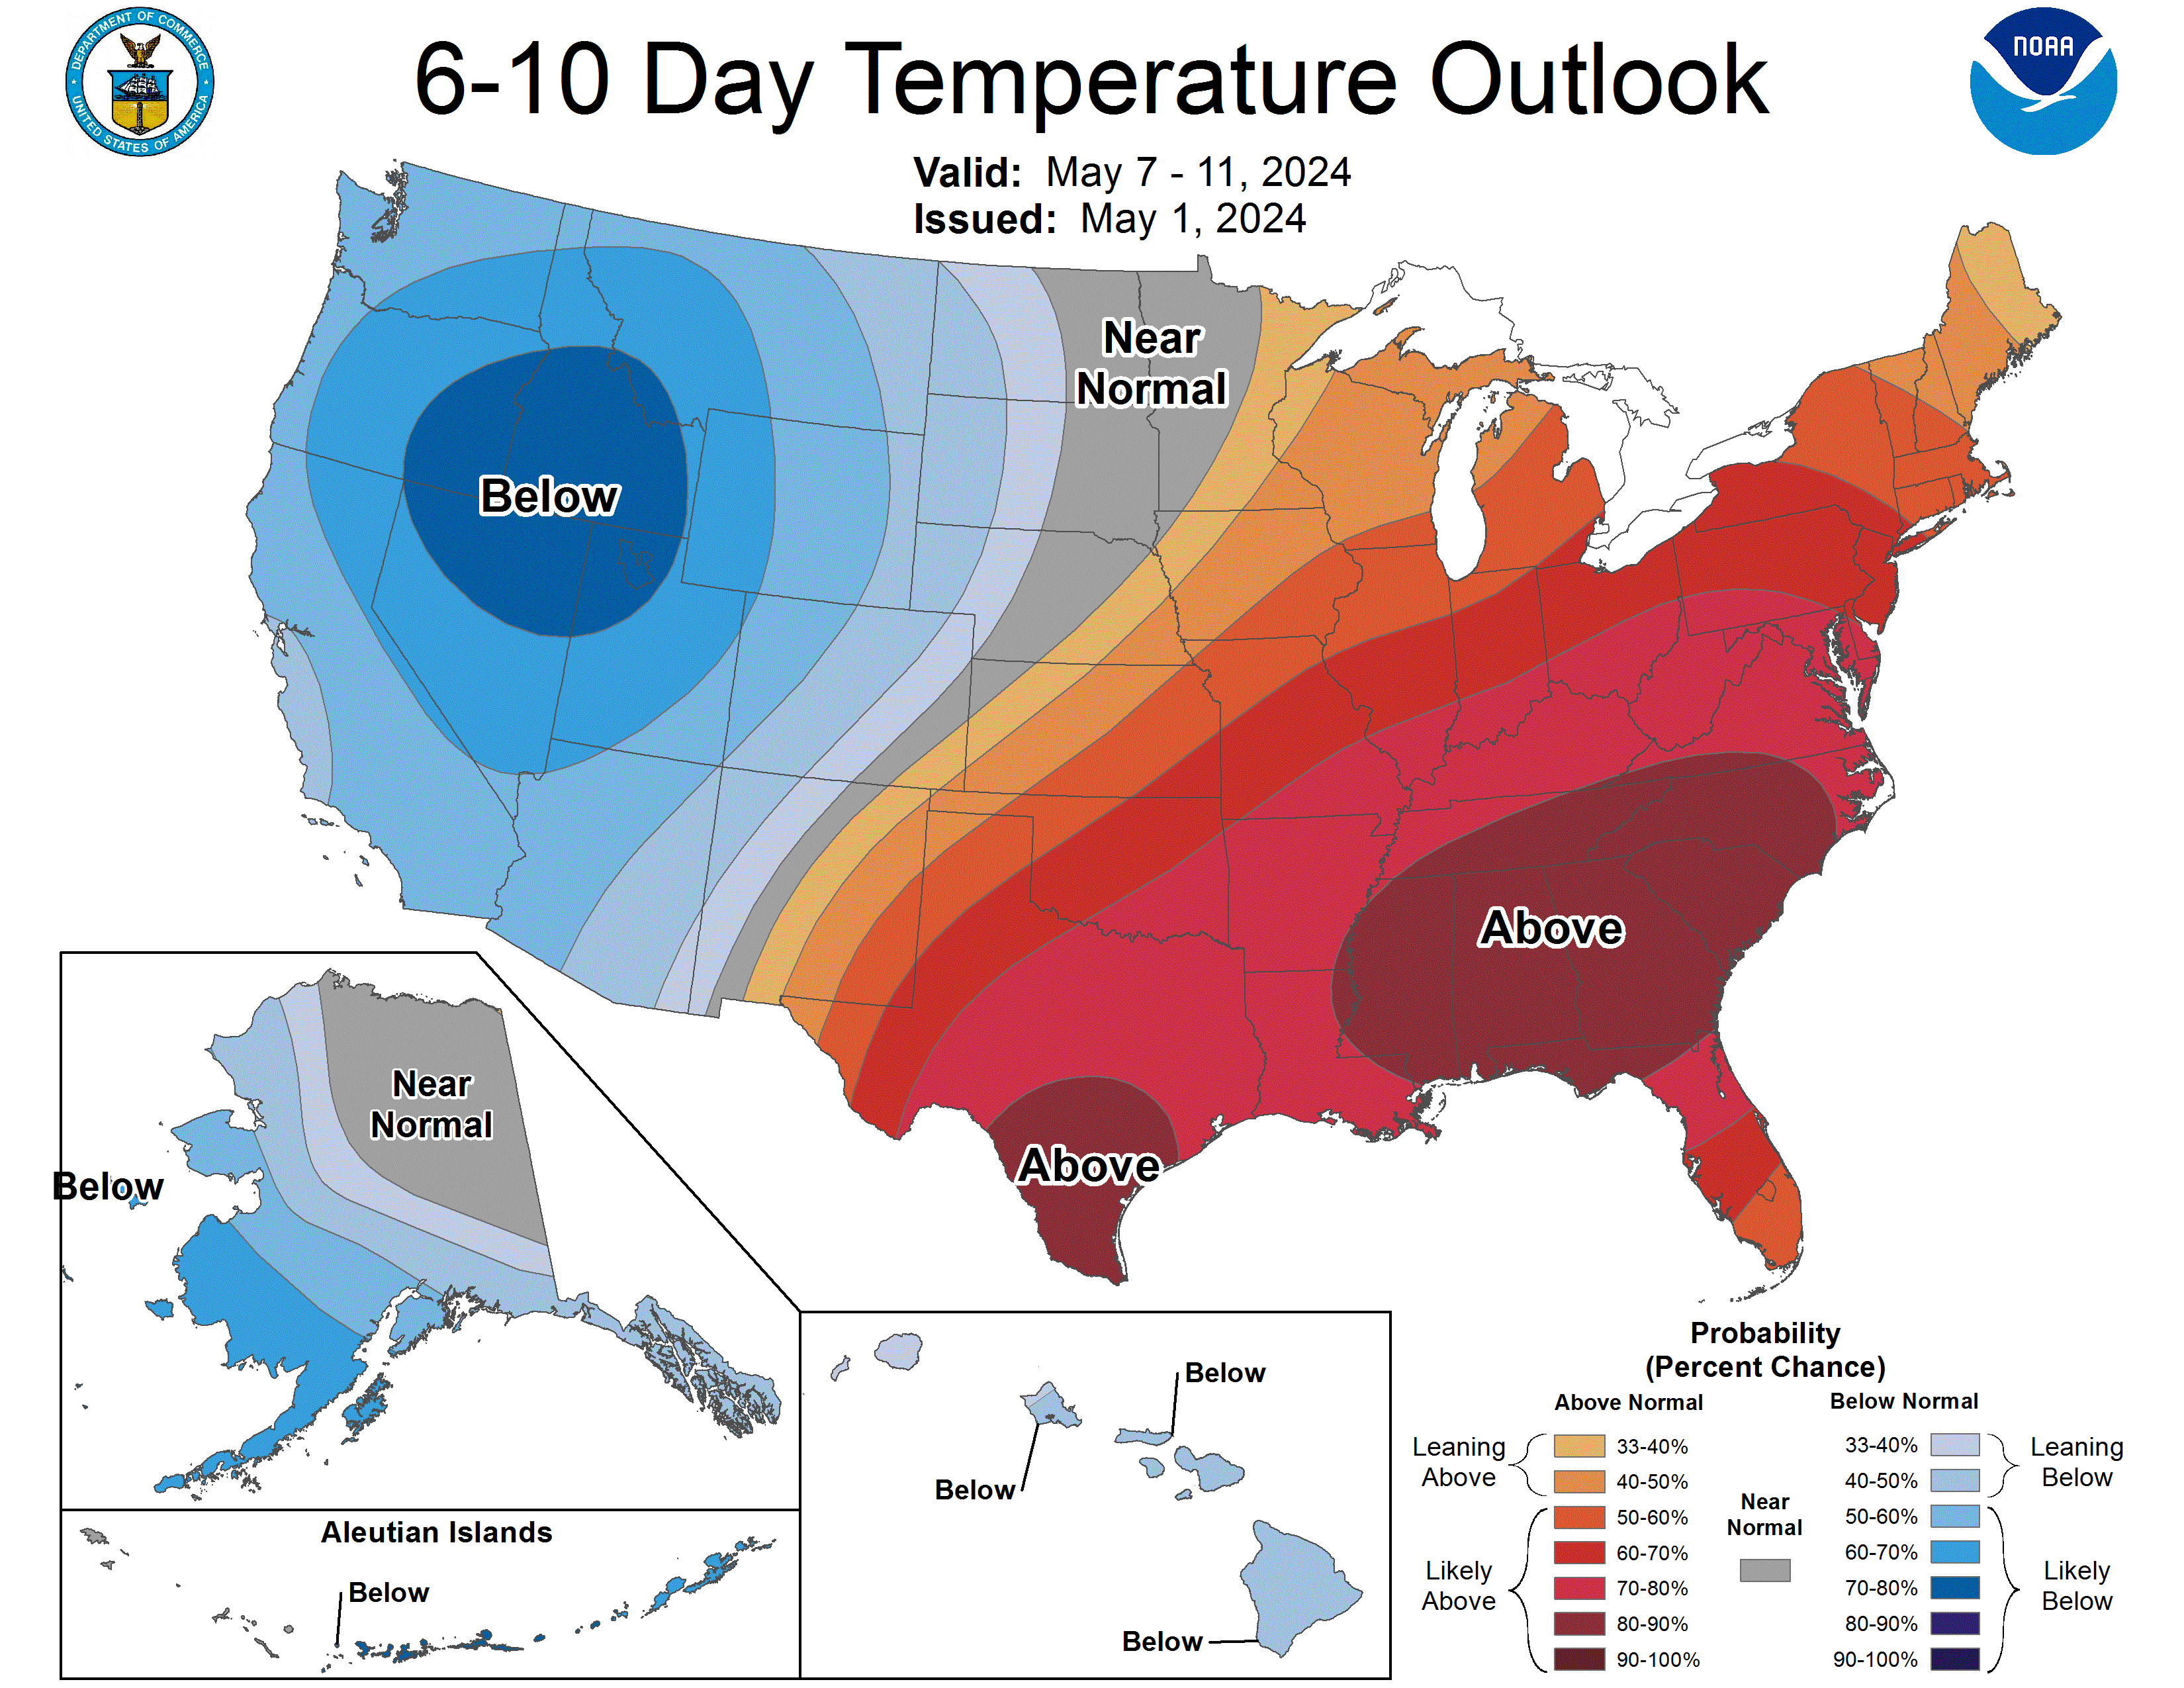 6-10 Day Outlook Temperature